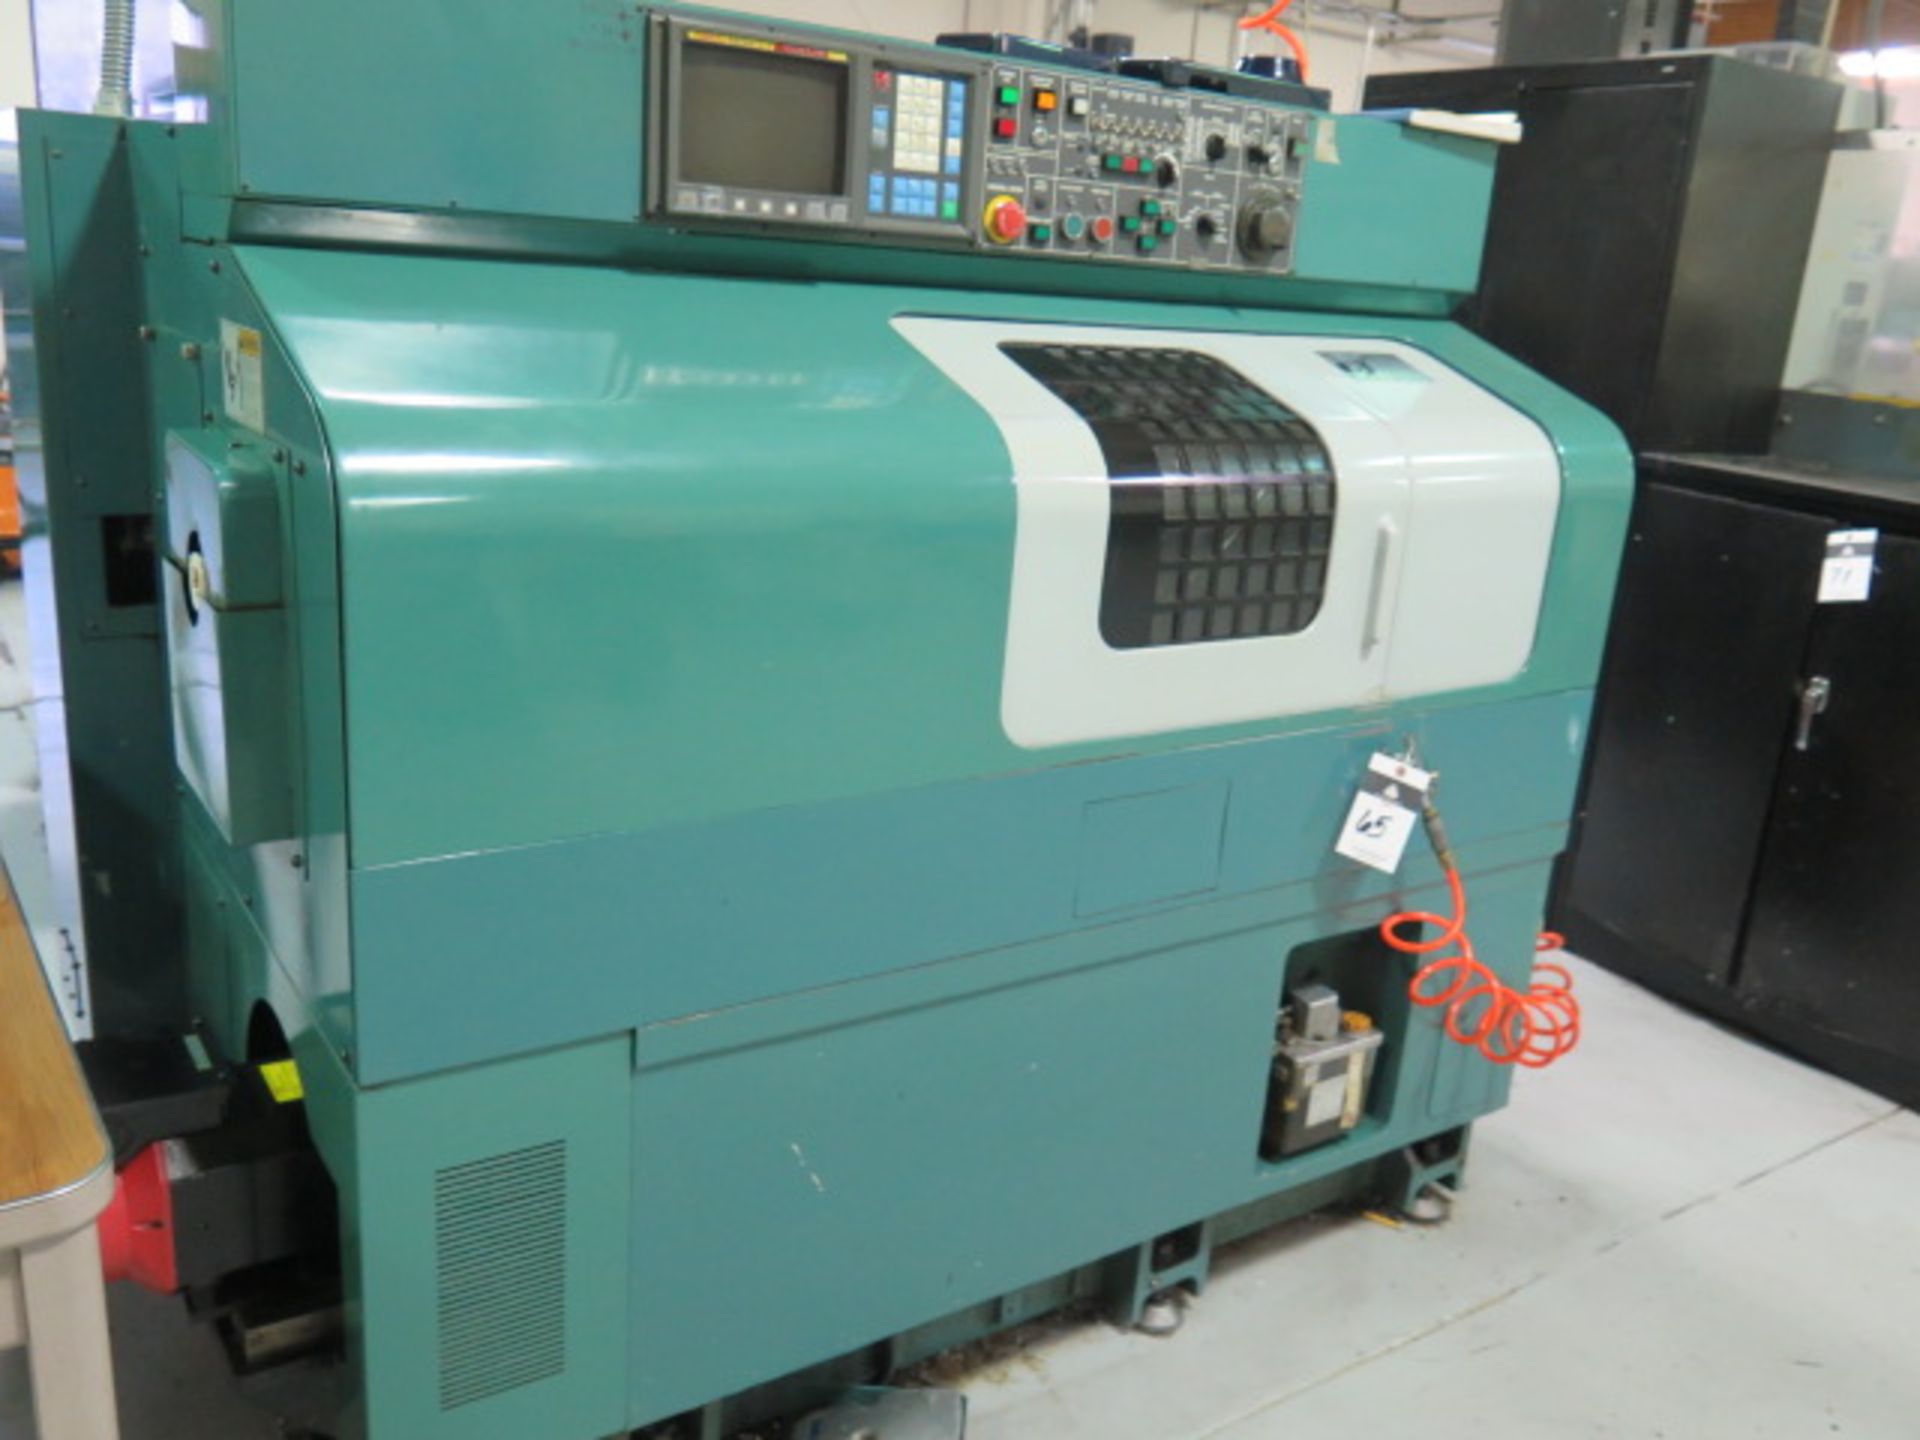 1996 Nakamura Tome TMC-15 CNC Turning Center s/n E04904 w/ Fanuc Series 0-T Controls, 10-Station - Image 3 of 10